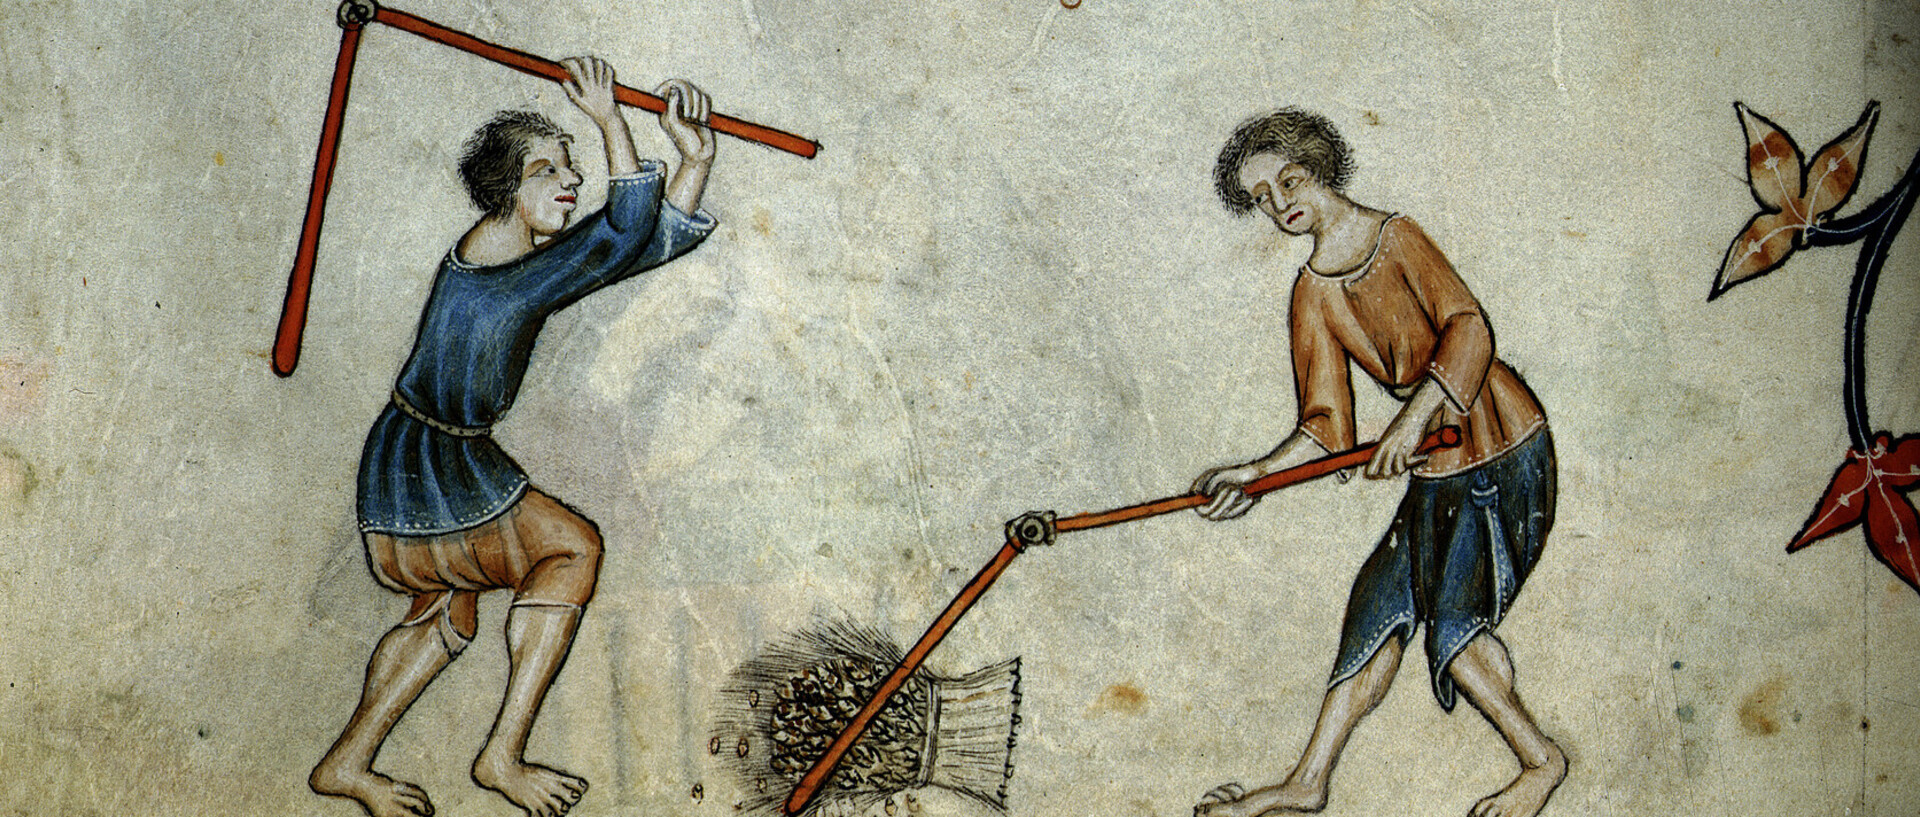 medieval depiction of two threshing people.